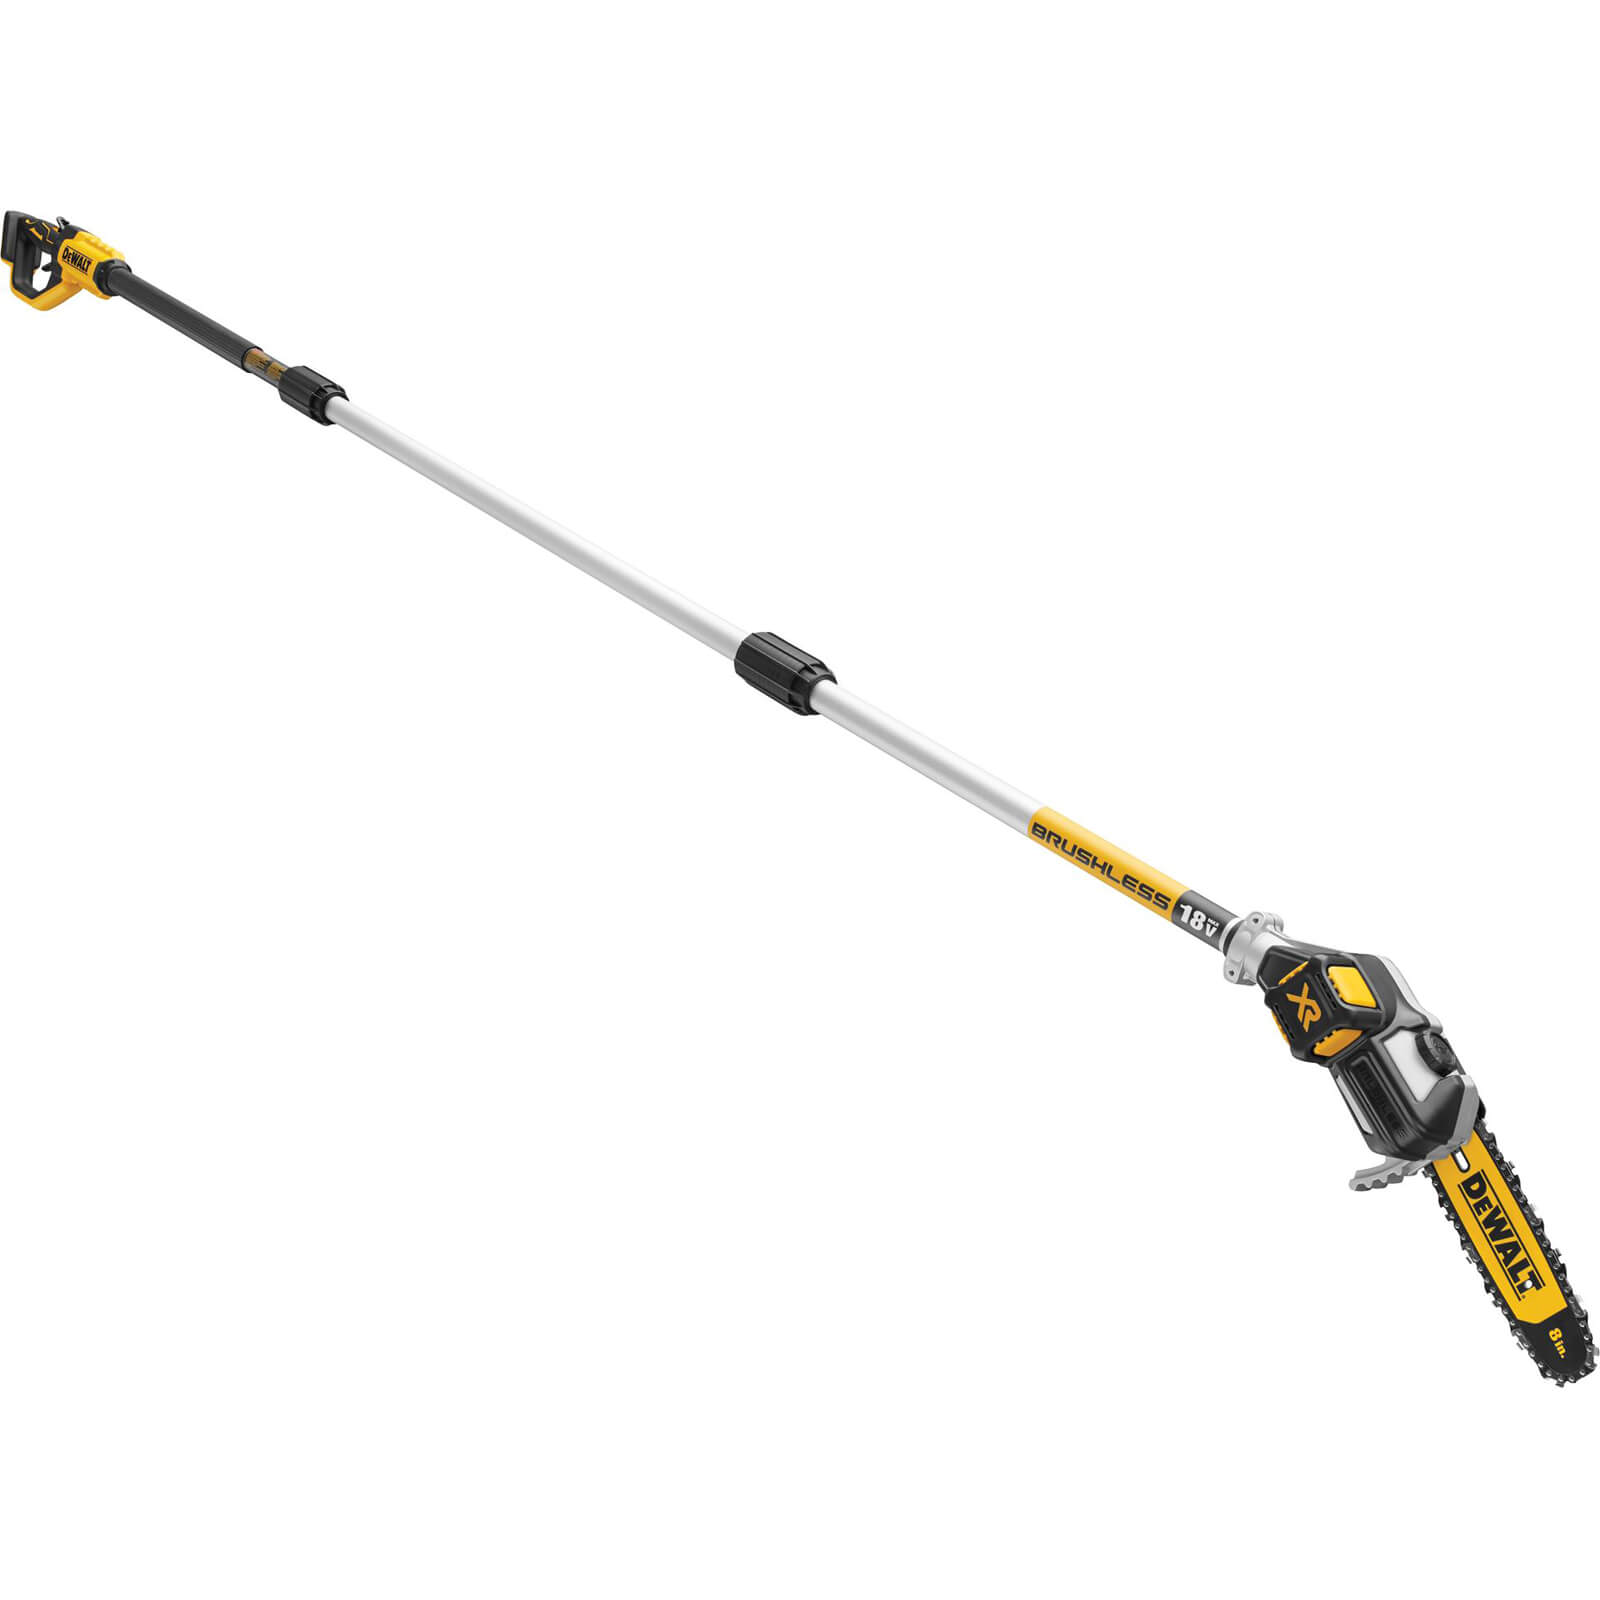 Image of DeWalt DCMPS567 18v XR Cordless Brushless Pole Chain Saw 200mm No Batteries No Charger